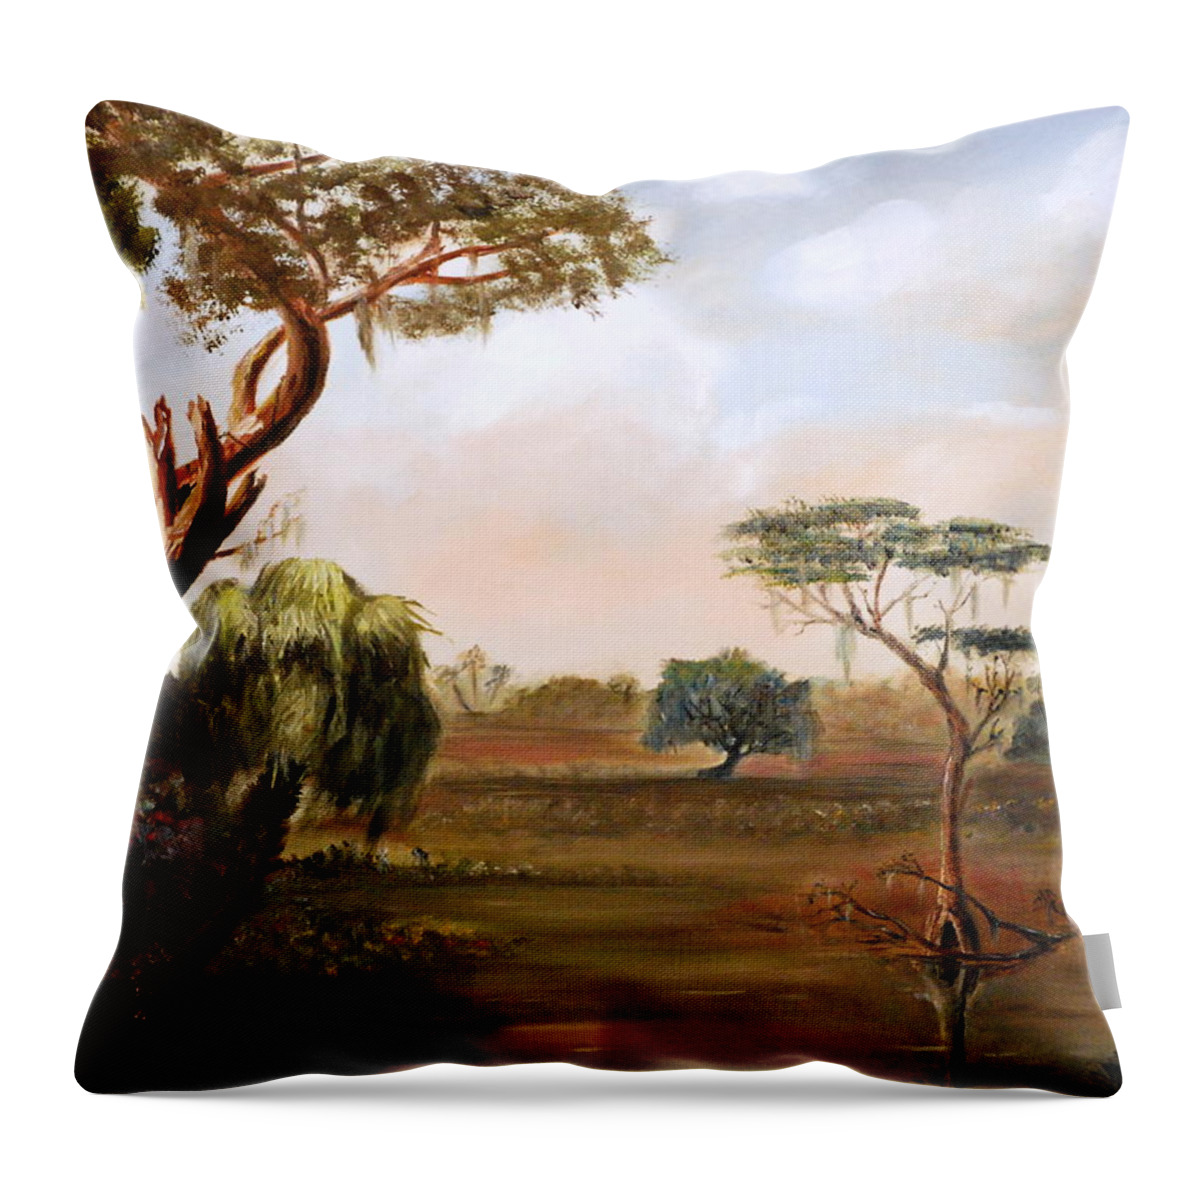 Low Country Throw Pillow featuring the painting Low Country Swamp by Phil Burton